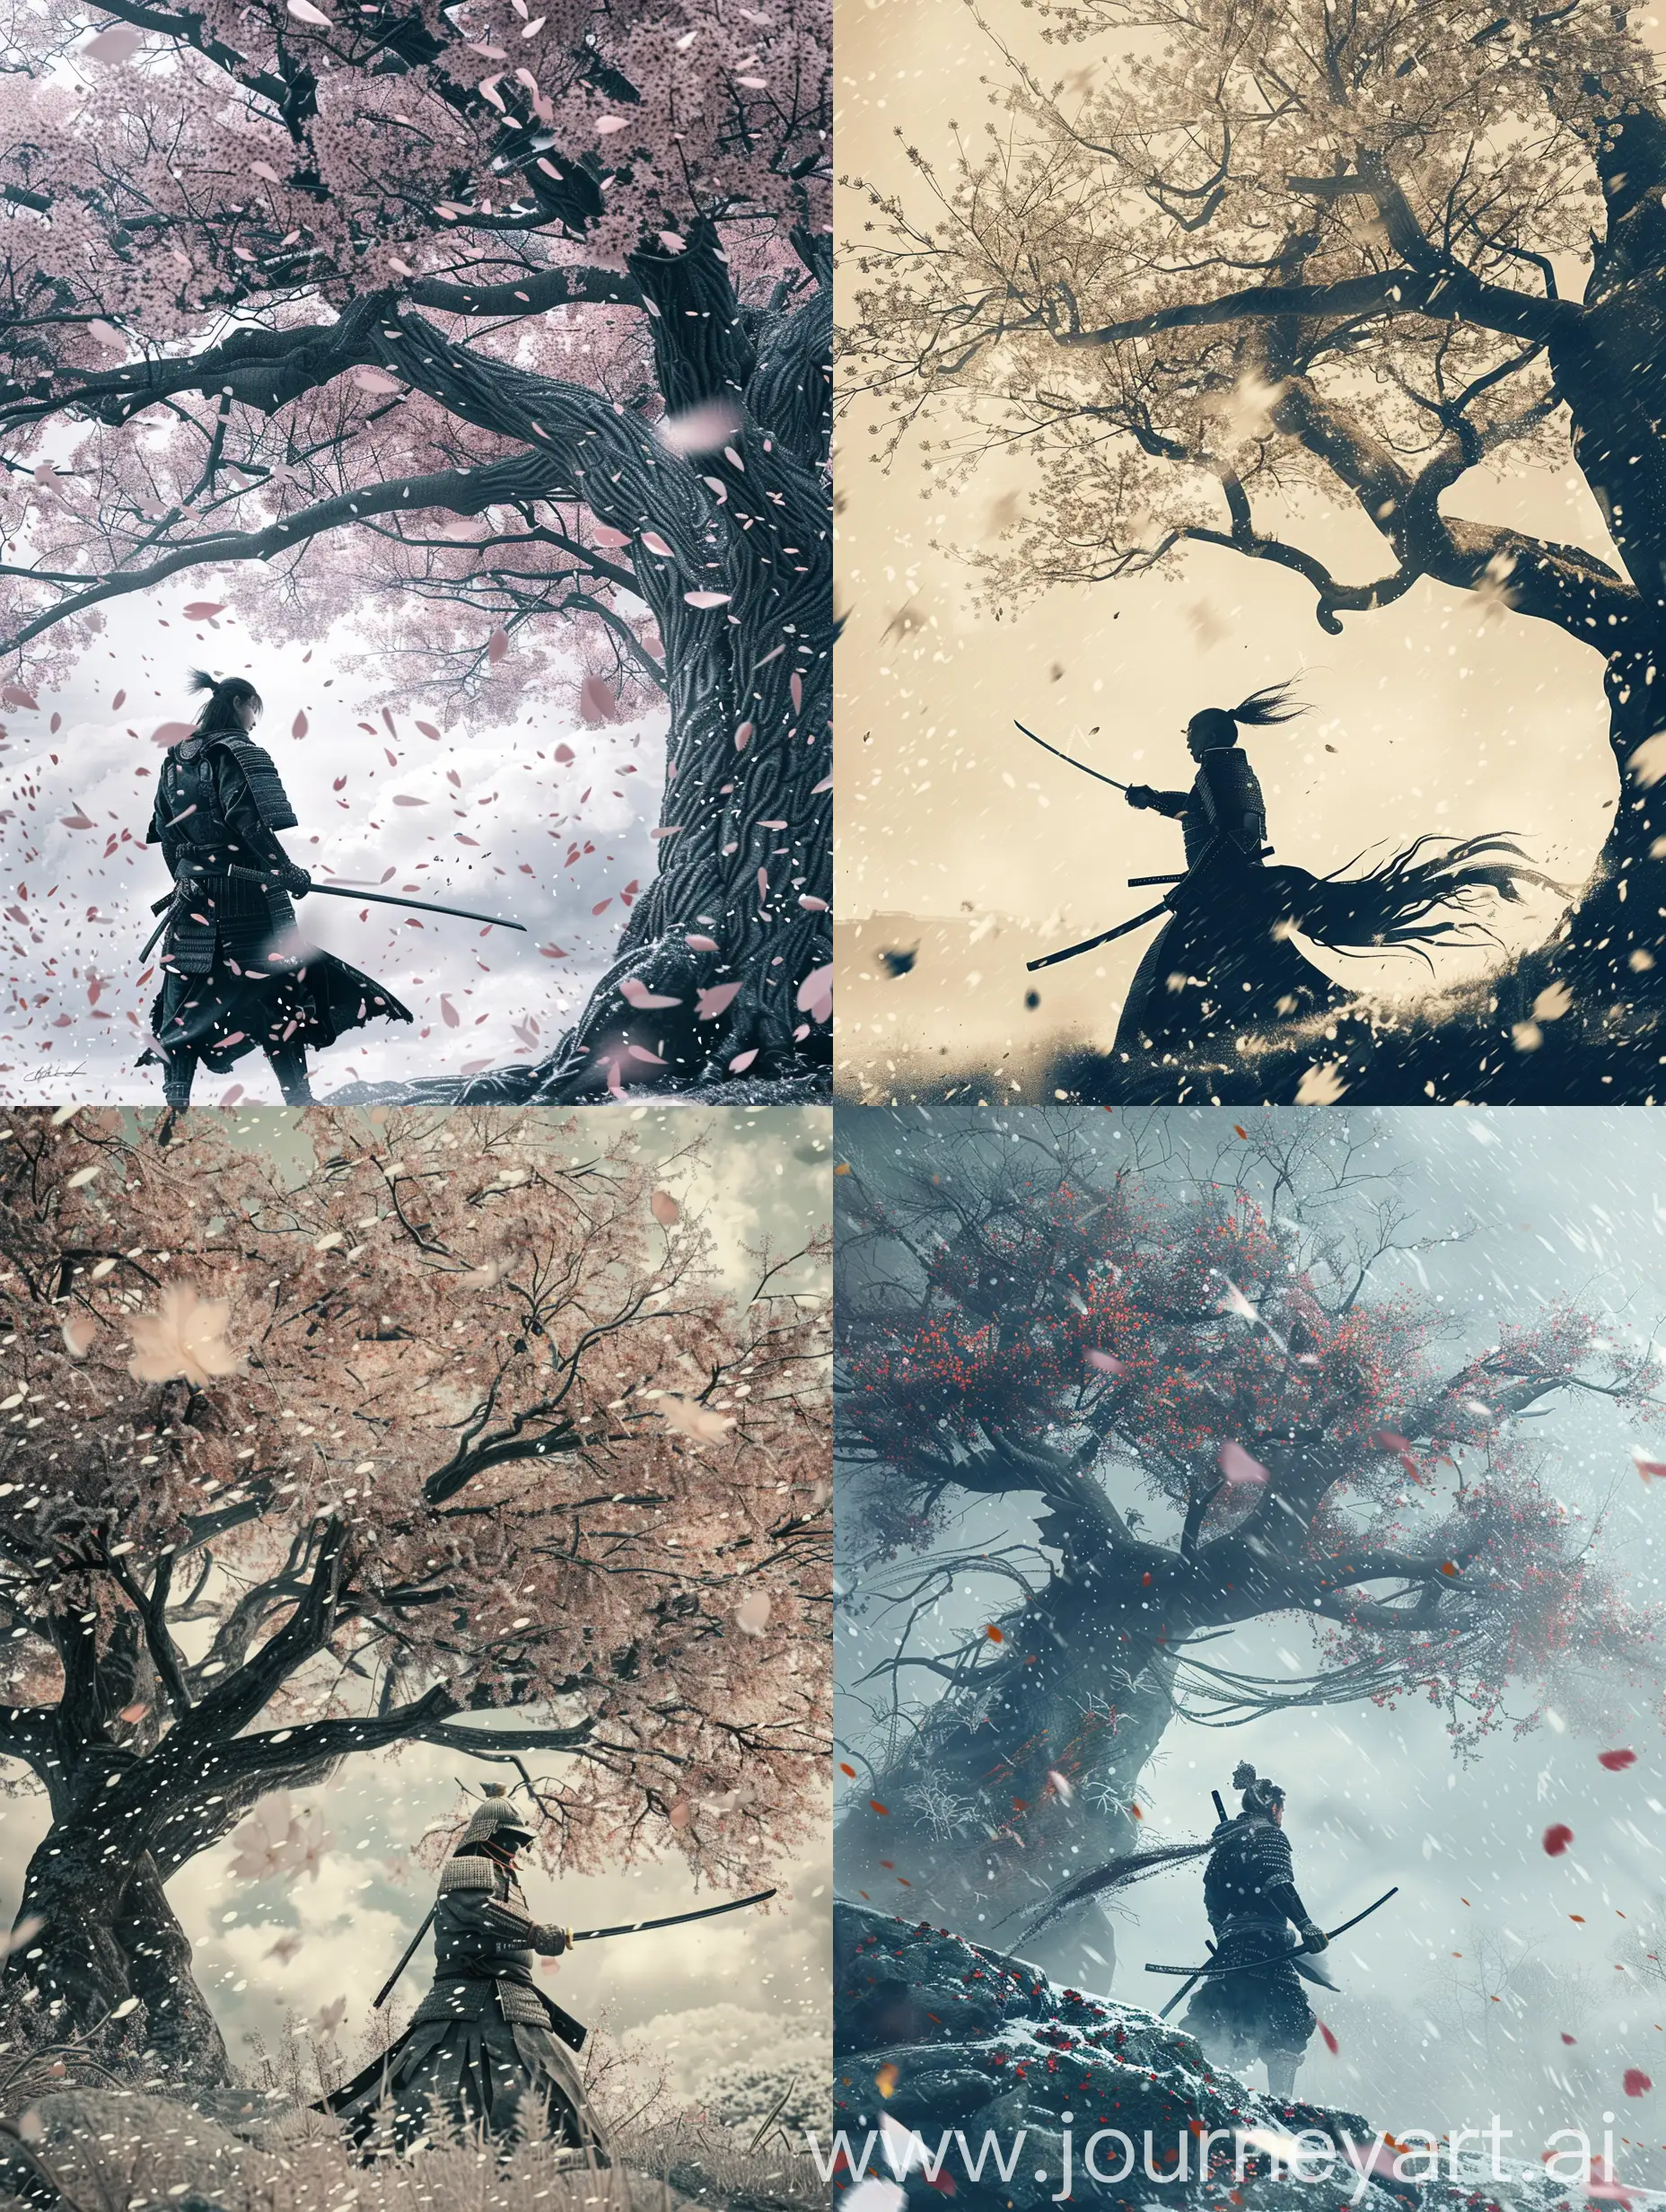 A samurai in a katana standing in a fighting stance near an ancient sakura tree, winter, falling snow flakes, wind effect